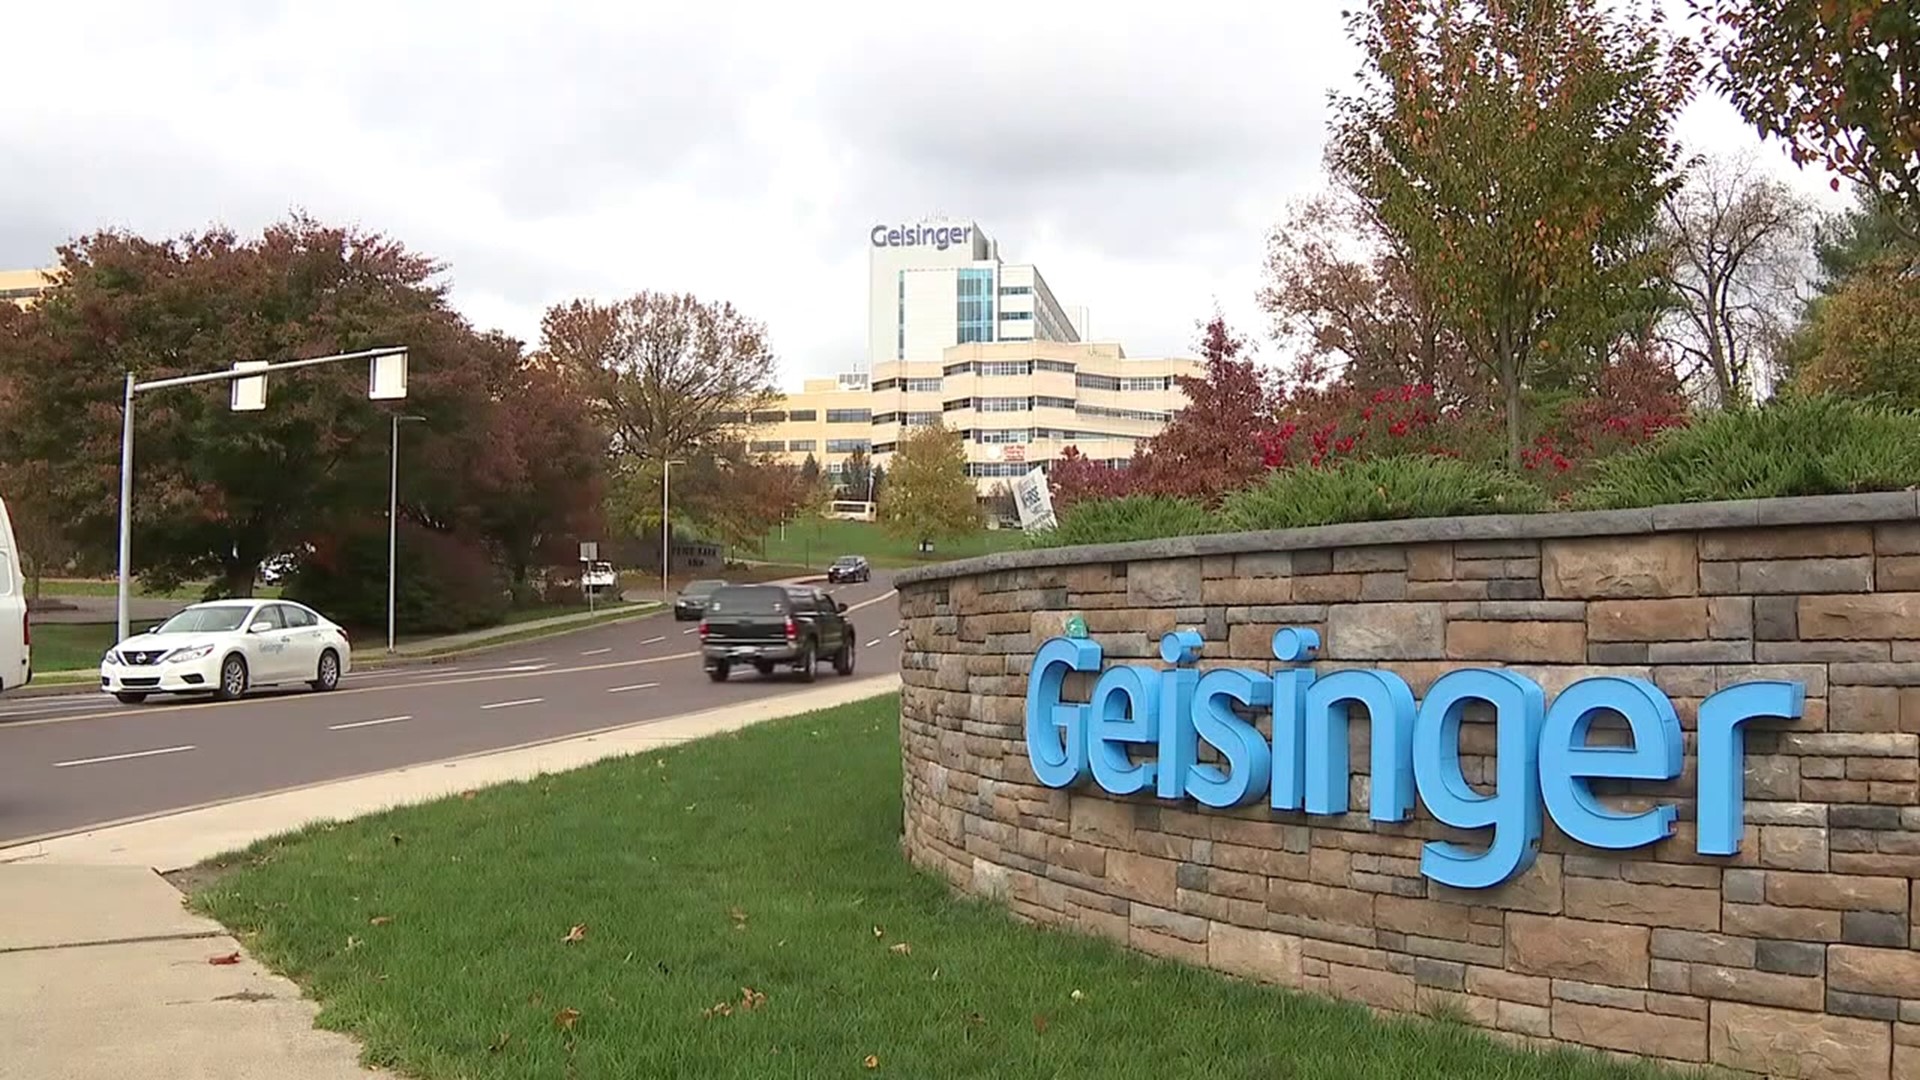 Geisinger laid off 47 IT employees Friday as part of a restructuring process.